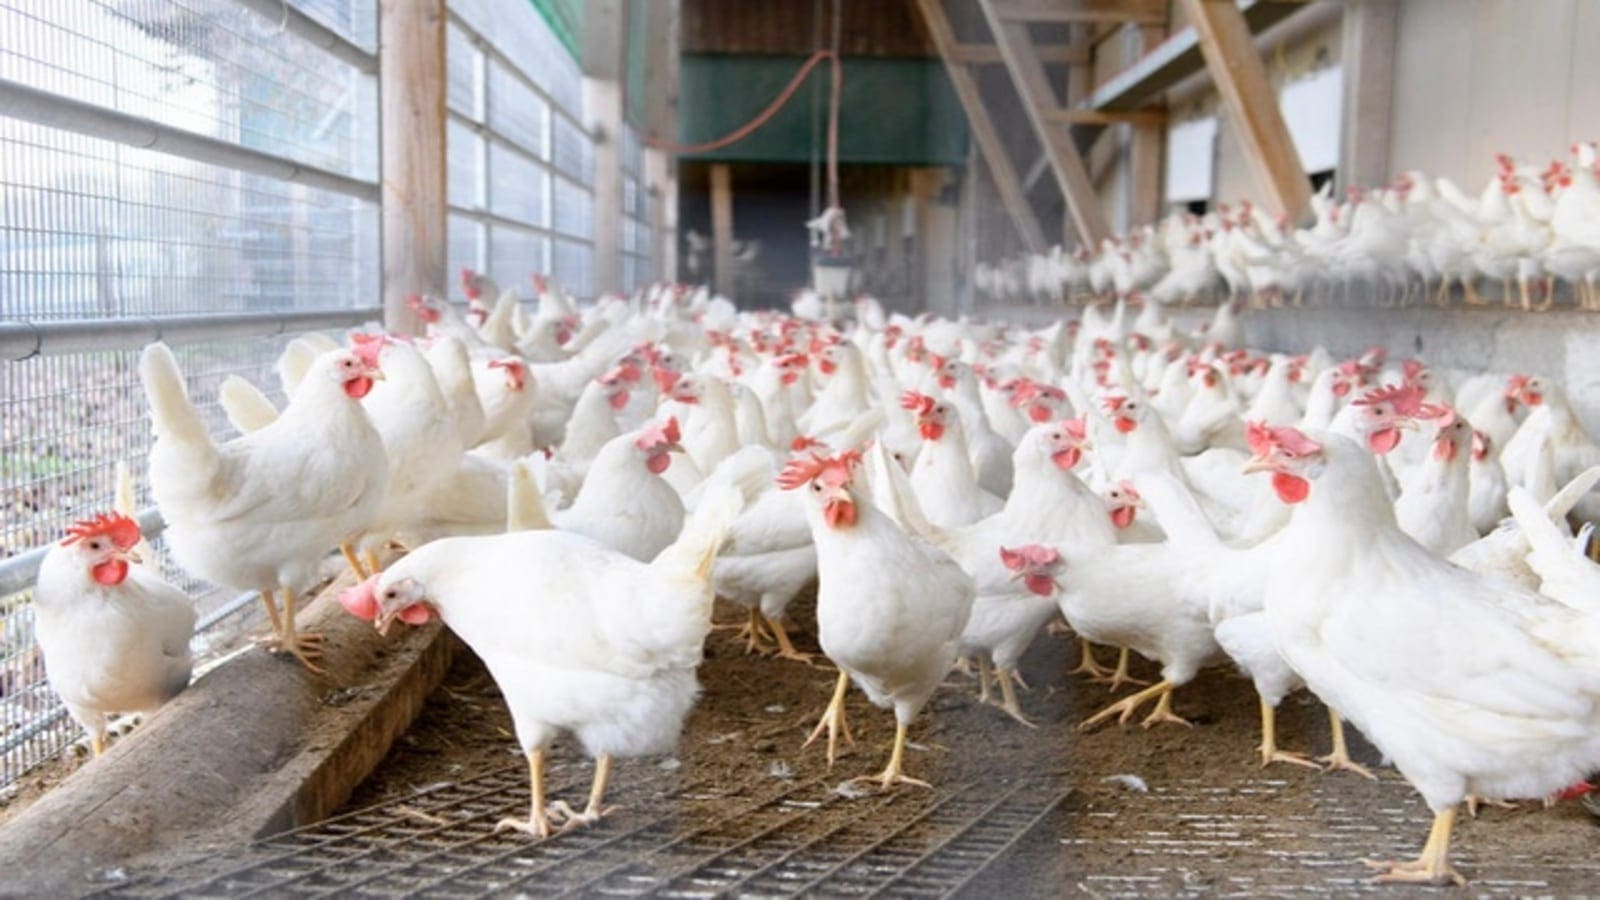 India’s poultry industry ravaged by pandemic as protein prices surge beyond consumer reach